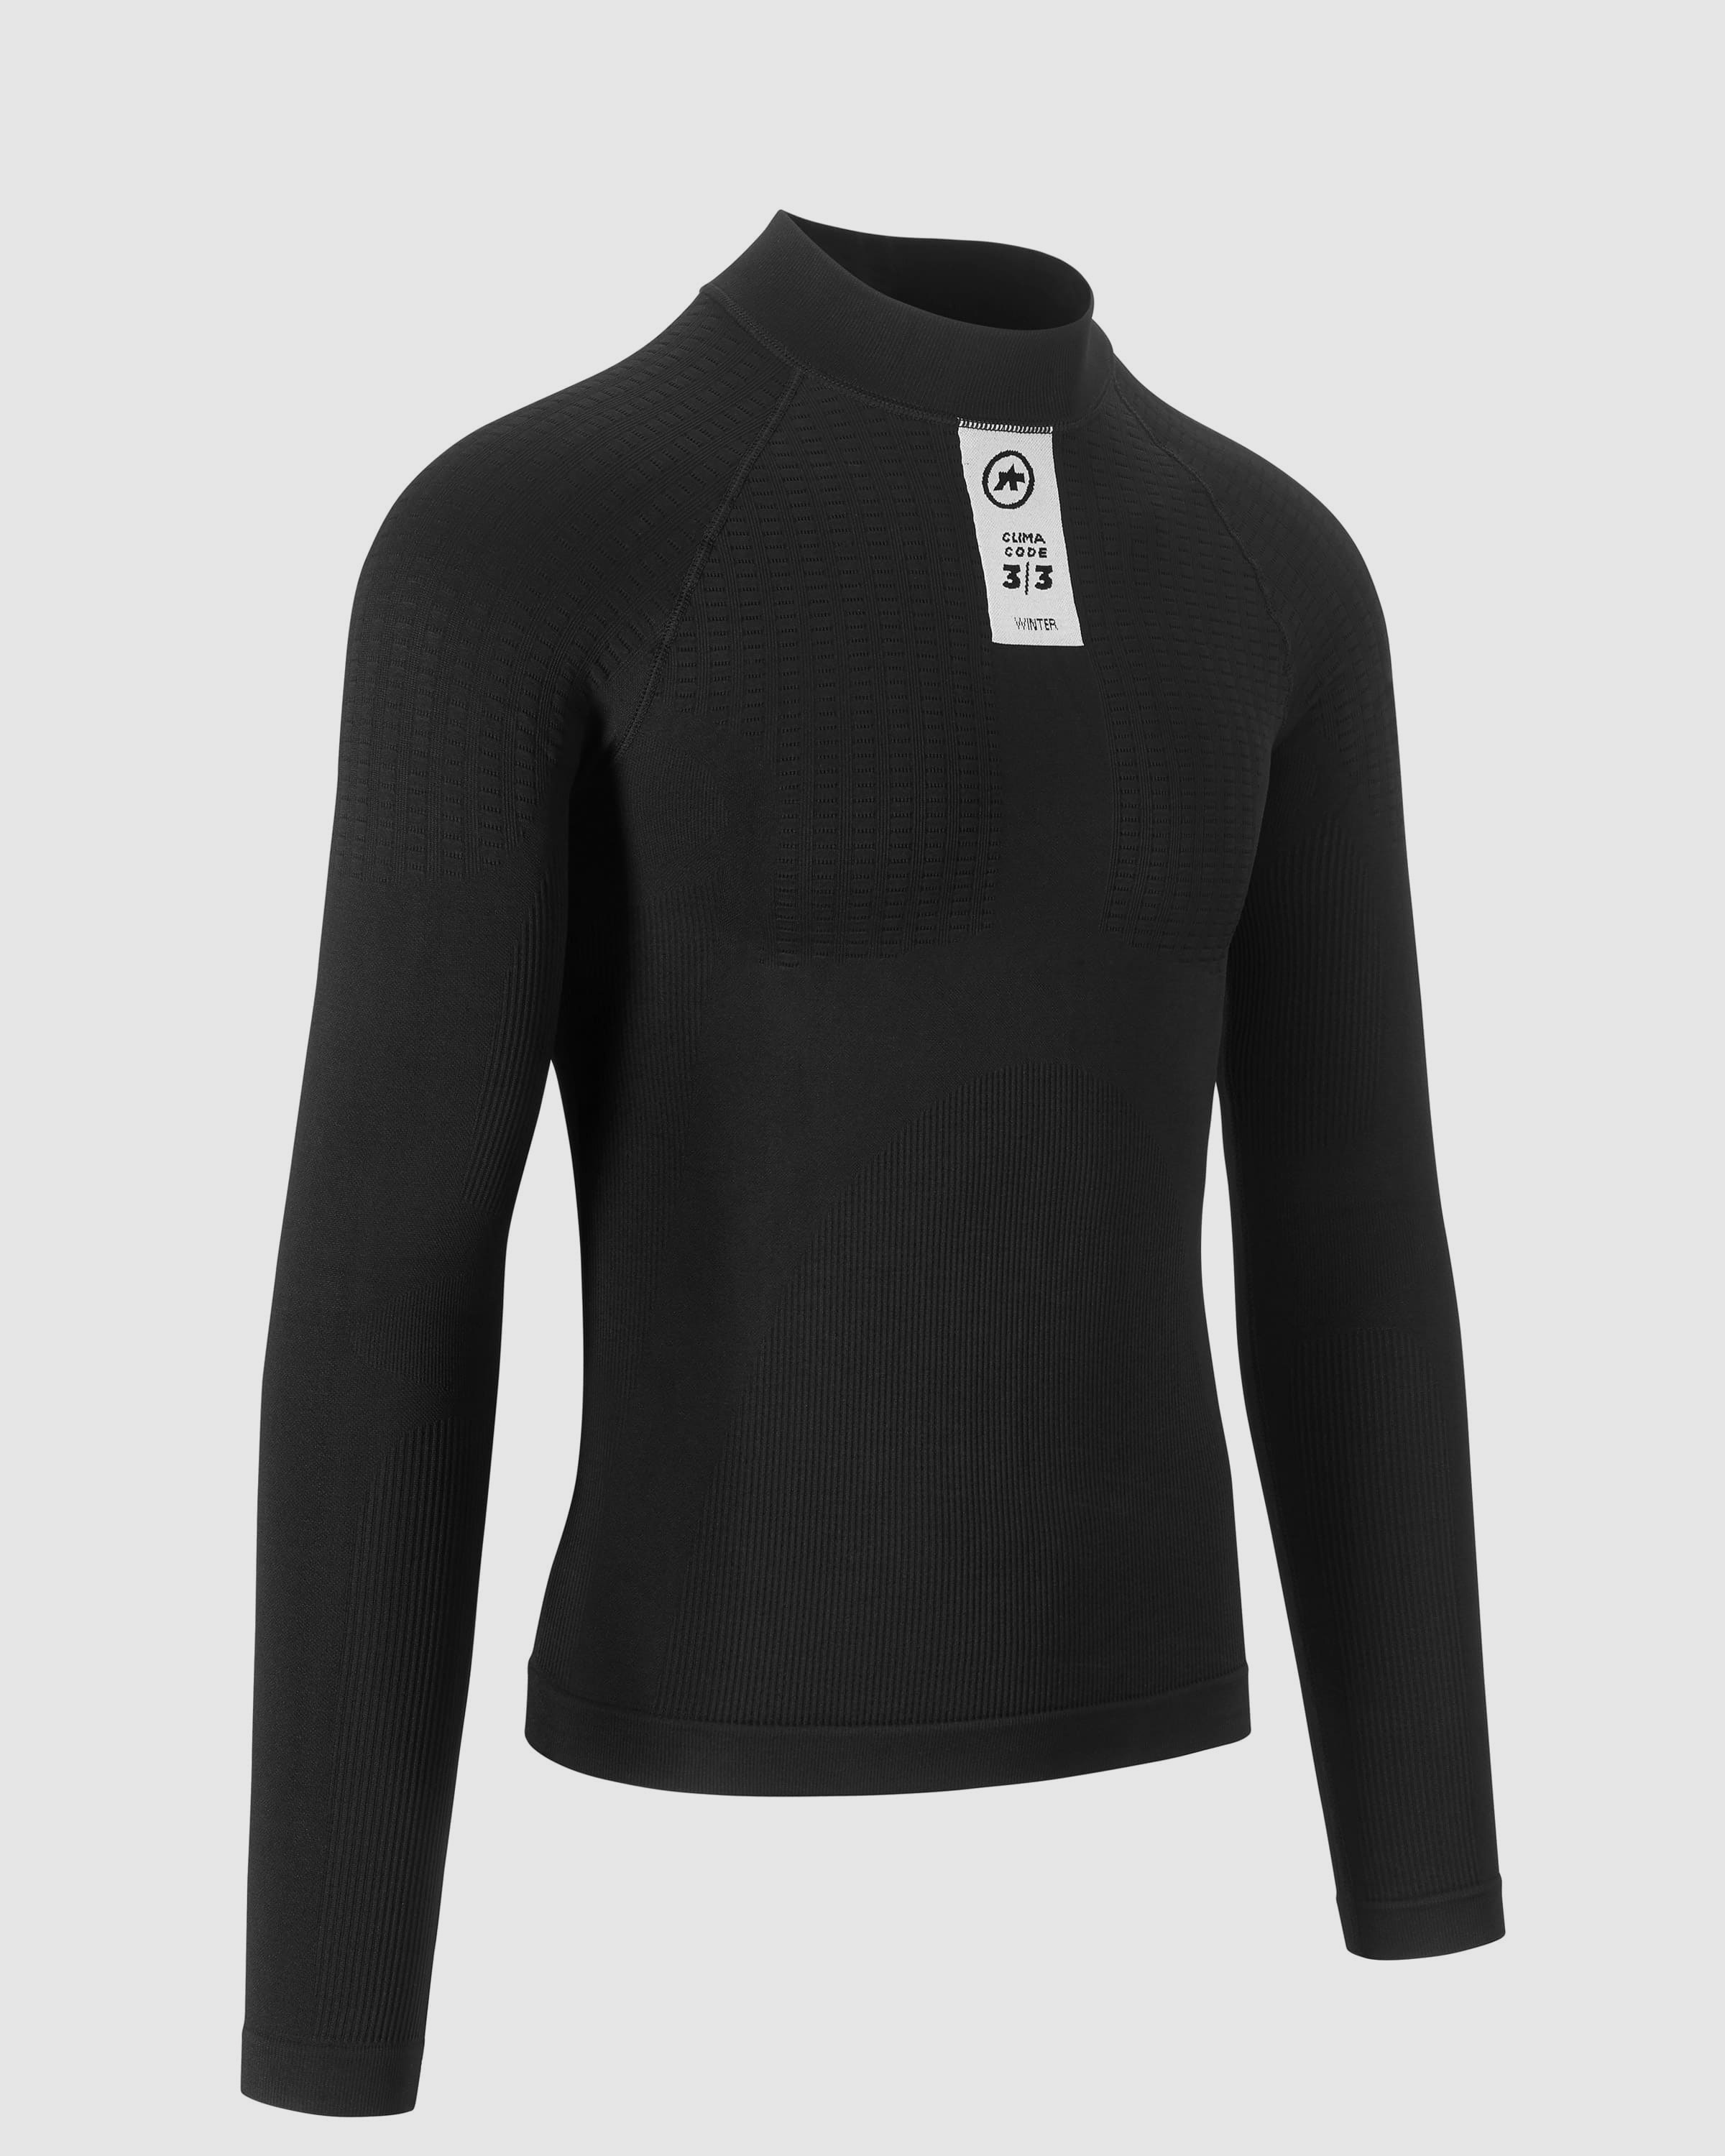 SKINFOIL Winter LS Base Layer - ASSOS Of Switzerland - Official Outlet